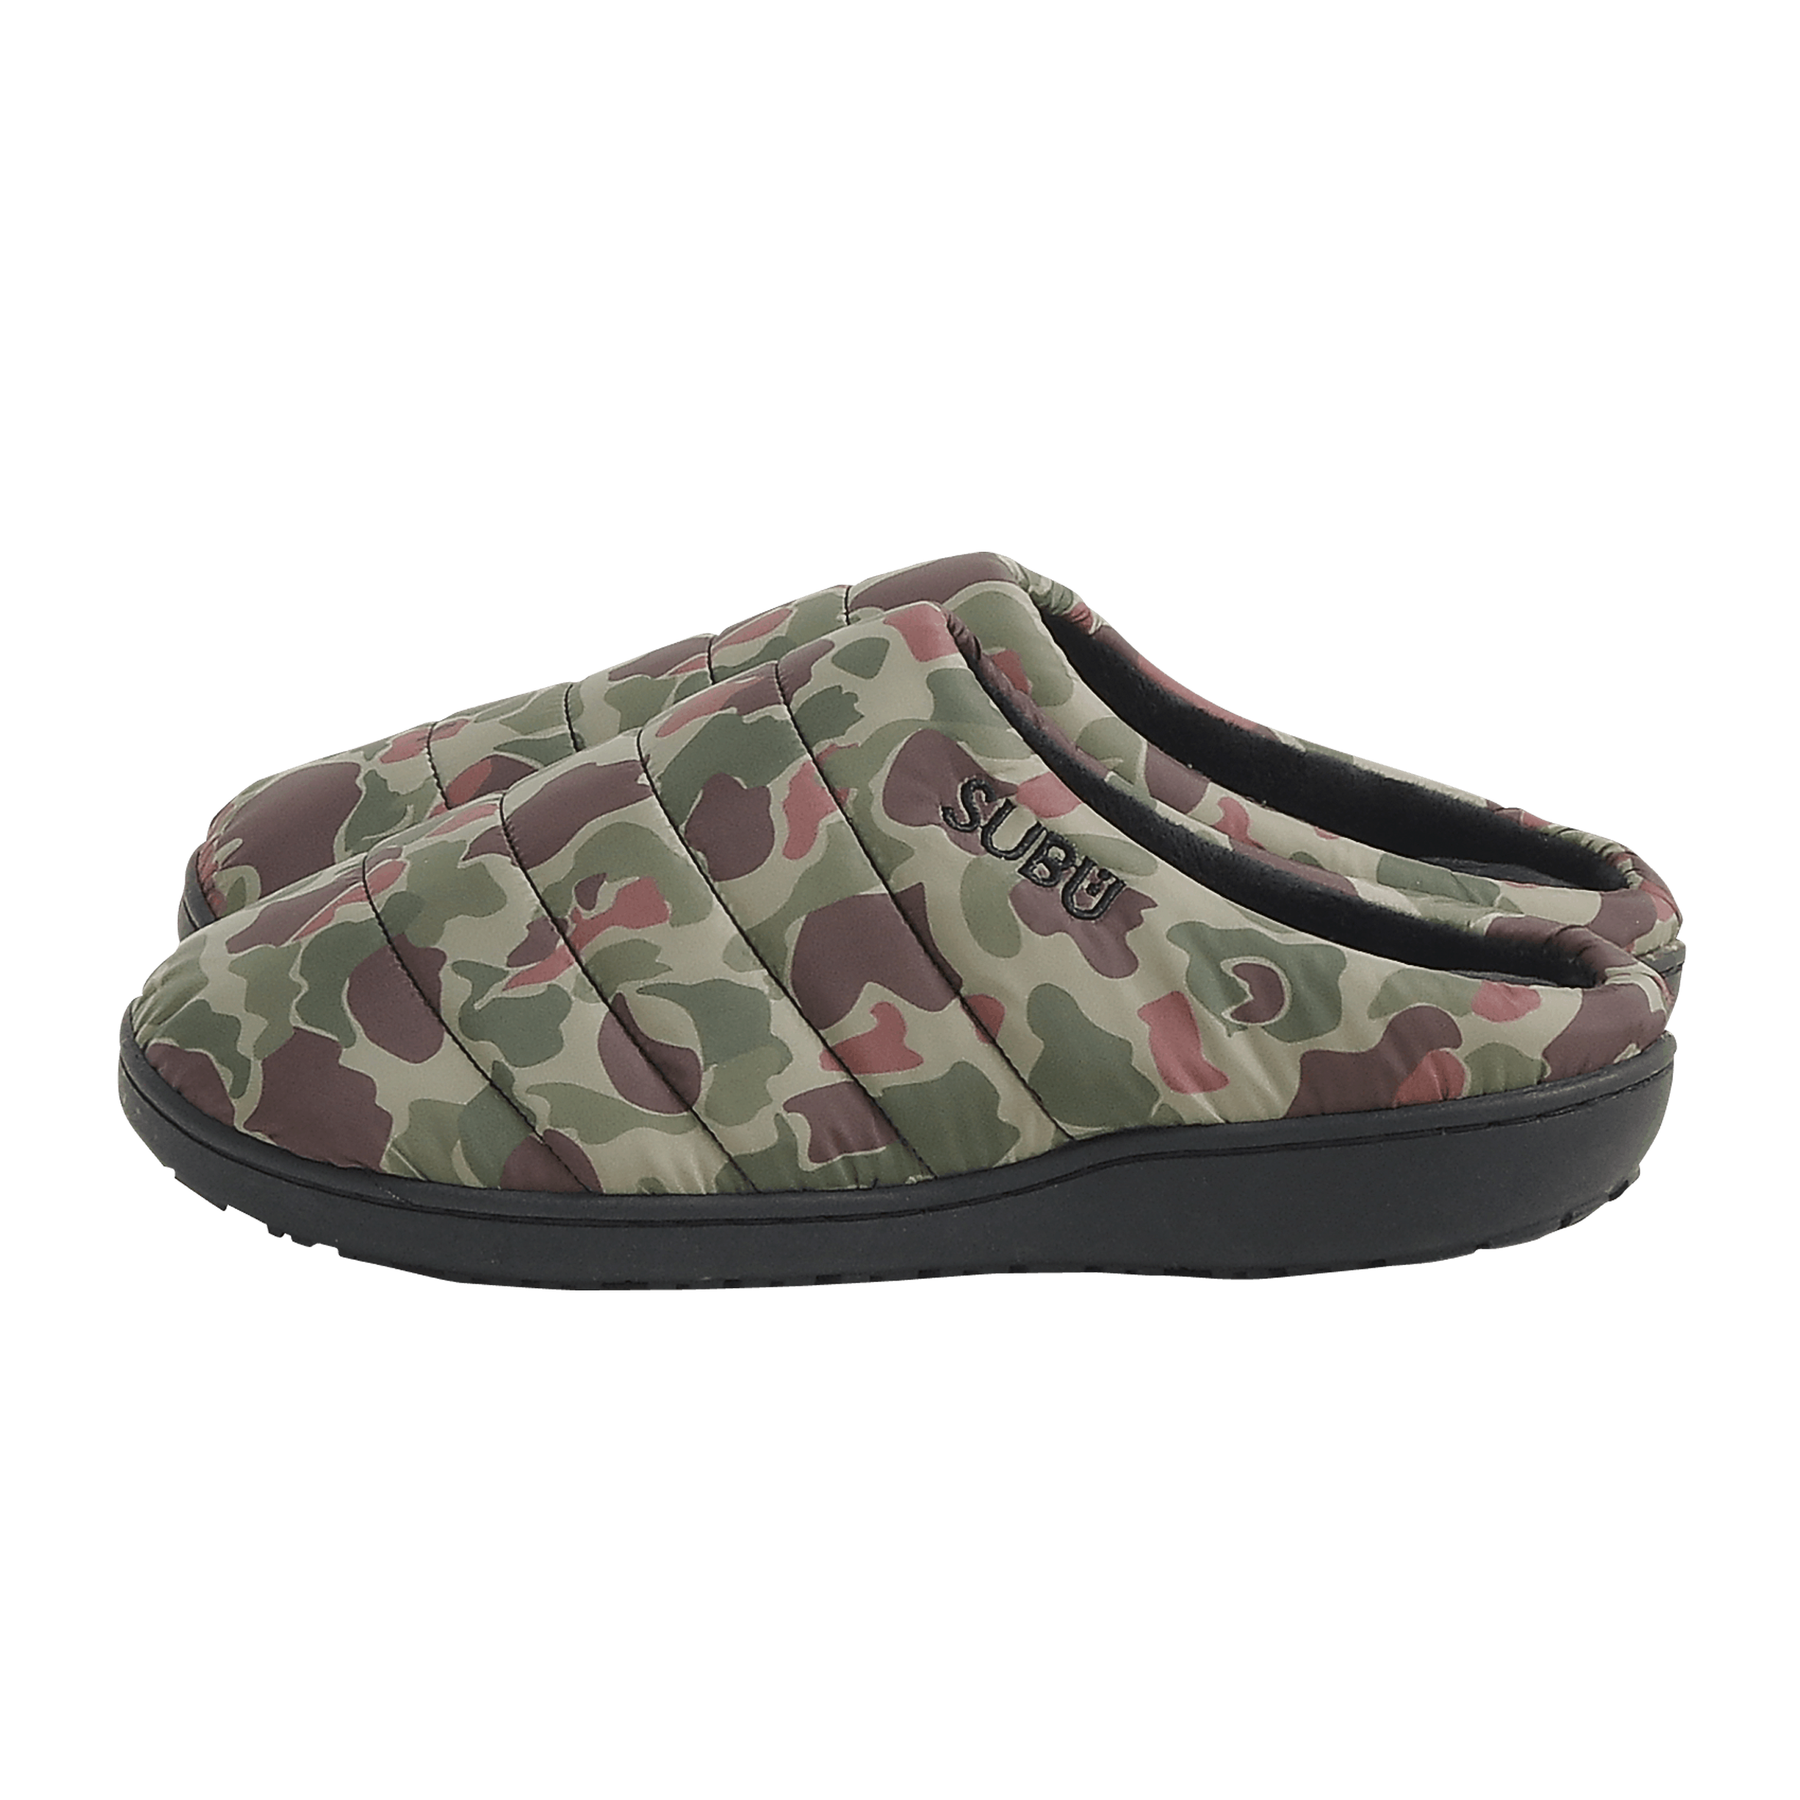 SUBU, Fall & Winter Slippers Duck Camo, Size, 0, Slippers,